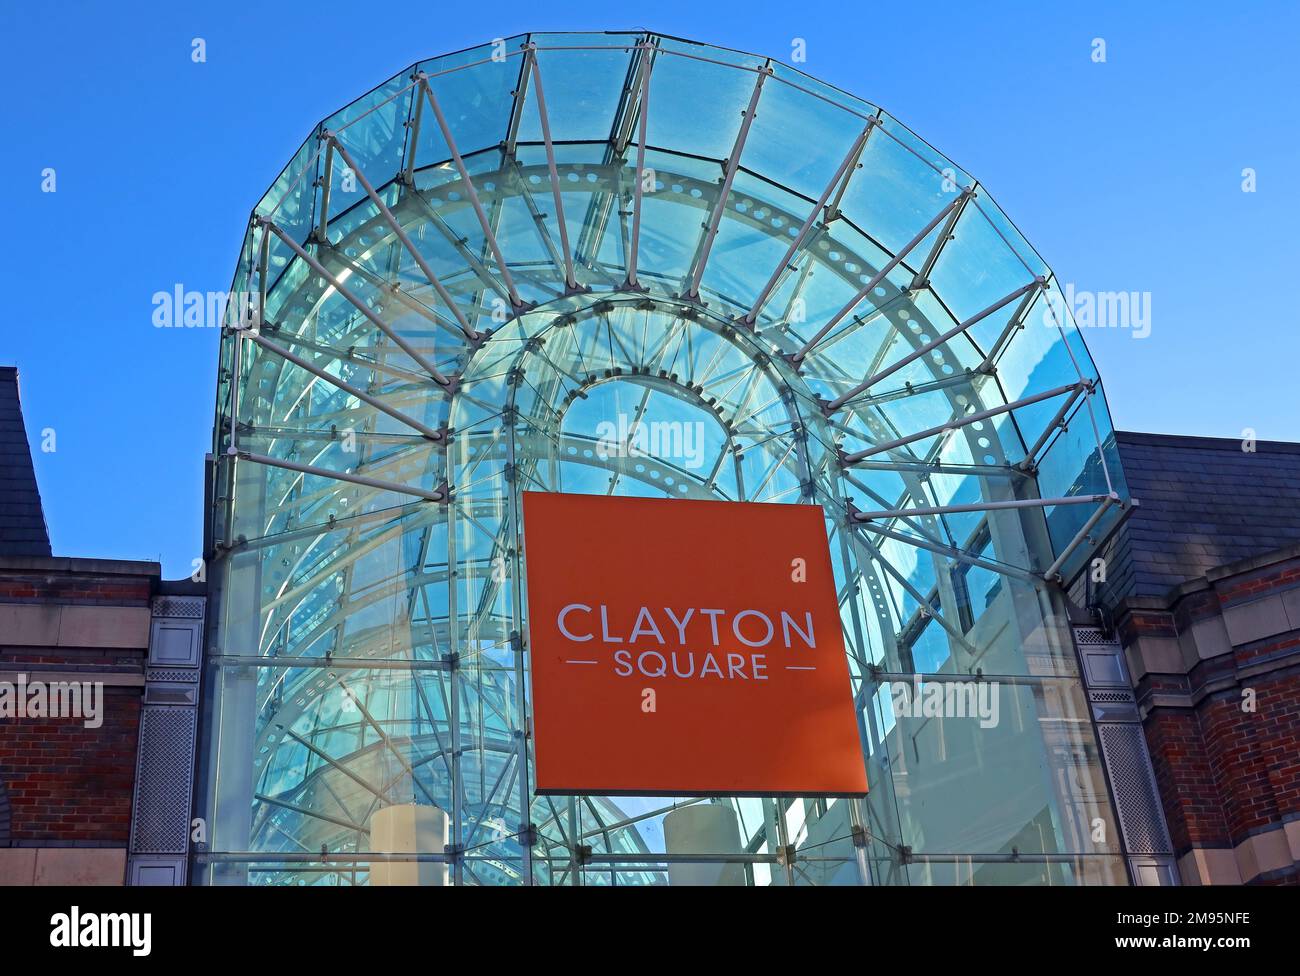 Clayton Square shopping centre, sign and glass canopy, Great Charlotte St, Liverpool, Merseyside, England, UK, L1 1QR Stock Photo